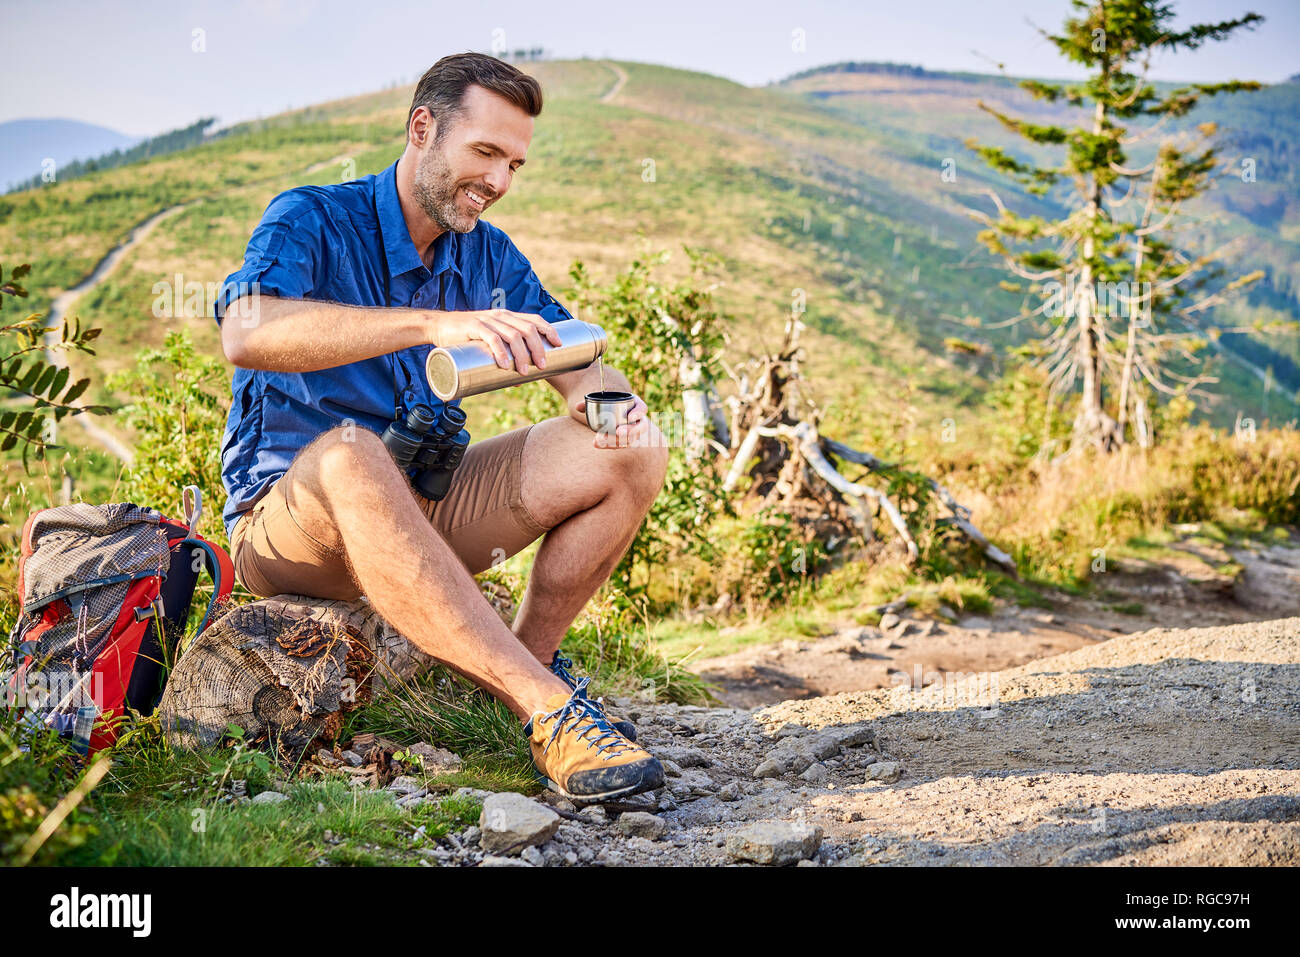 Smiling man resting during hiking trip pouring cold water from thermos flask Stock Photo